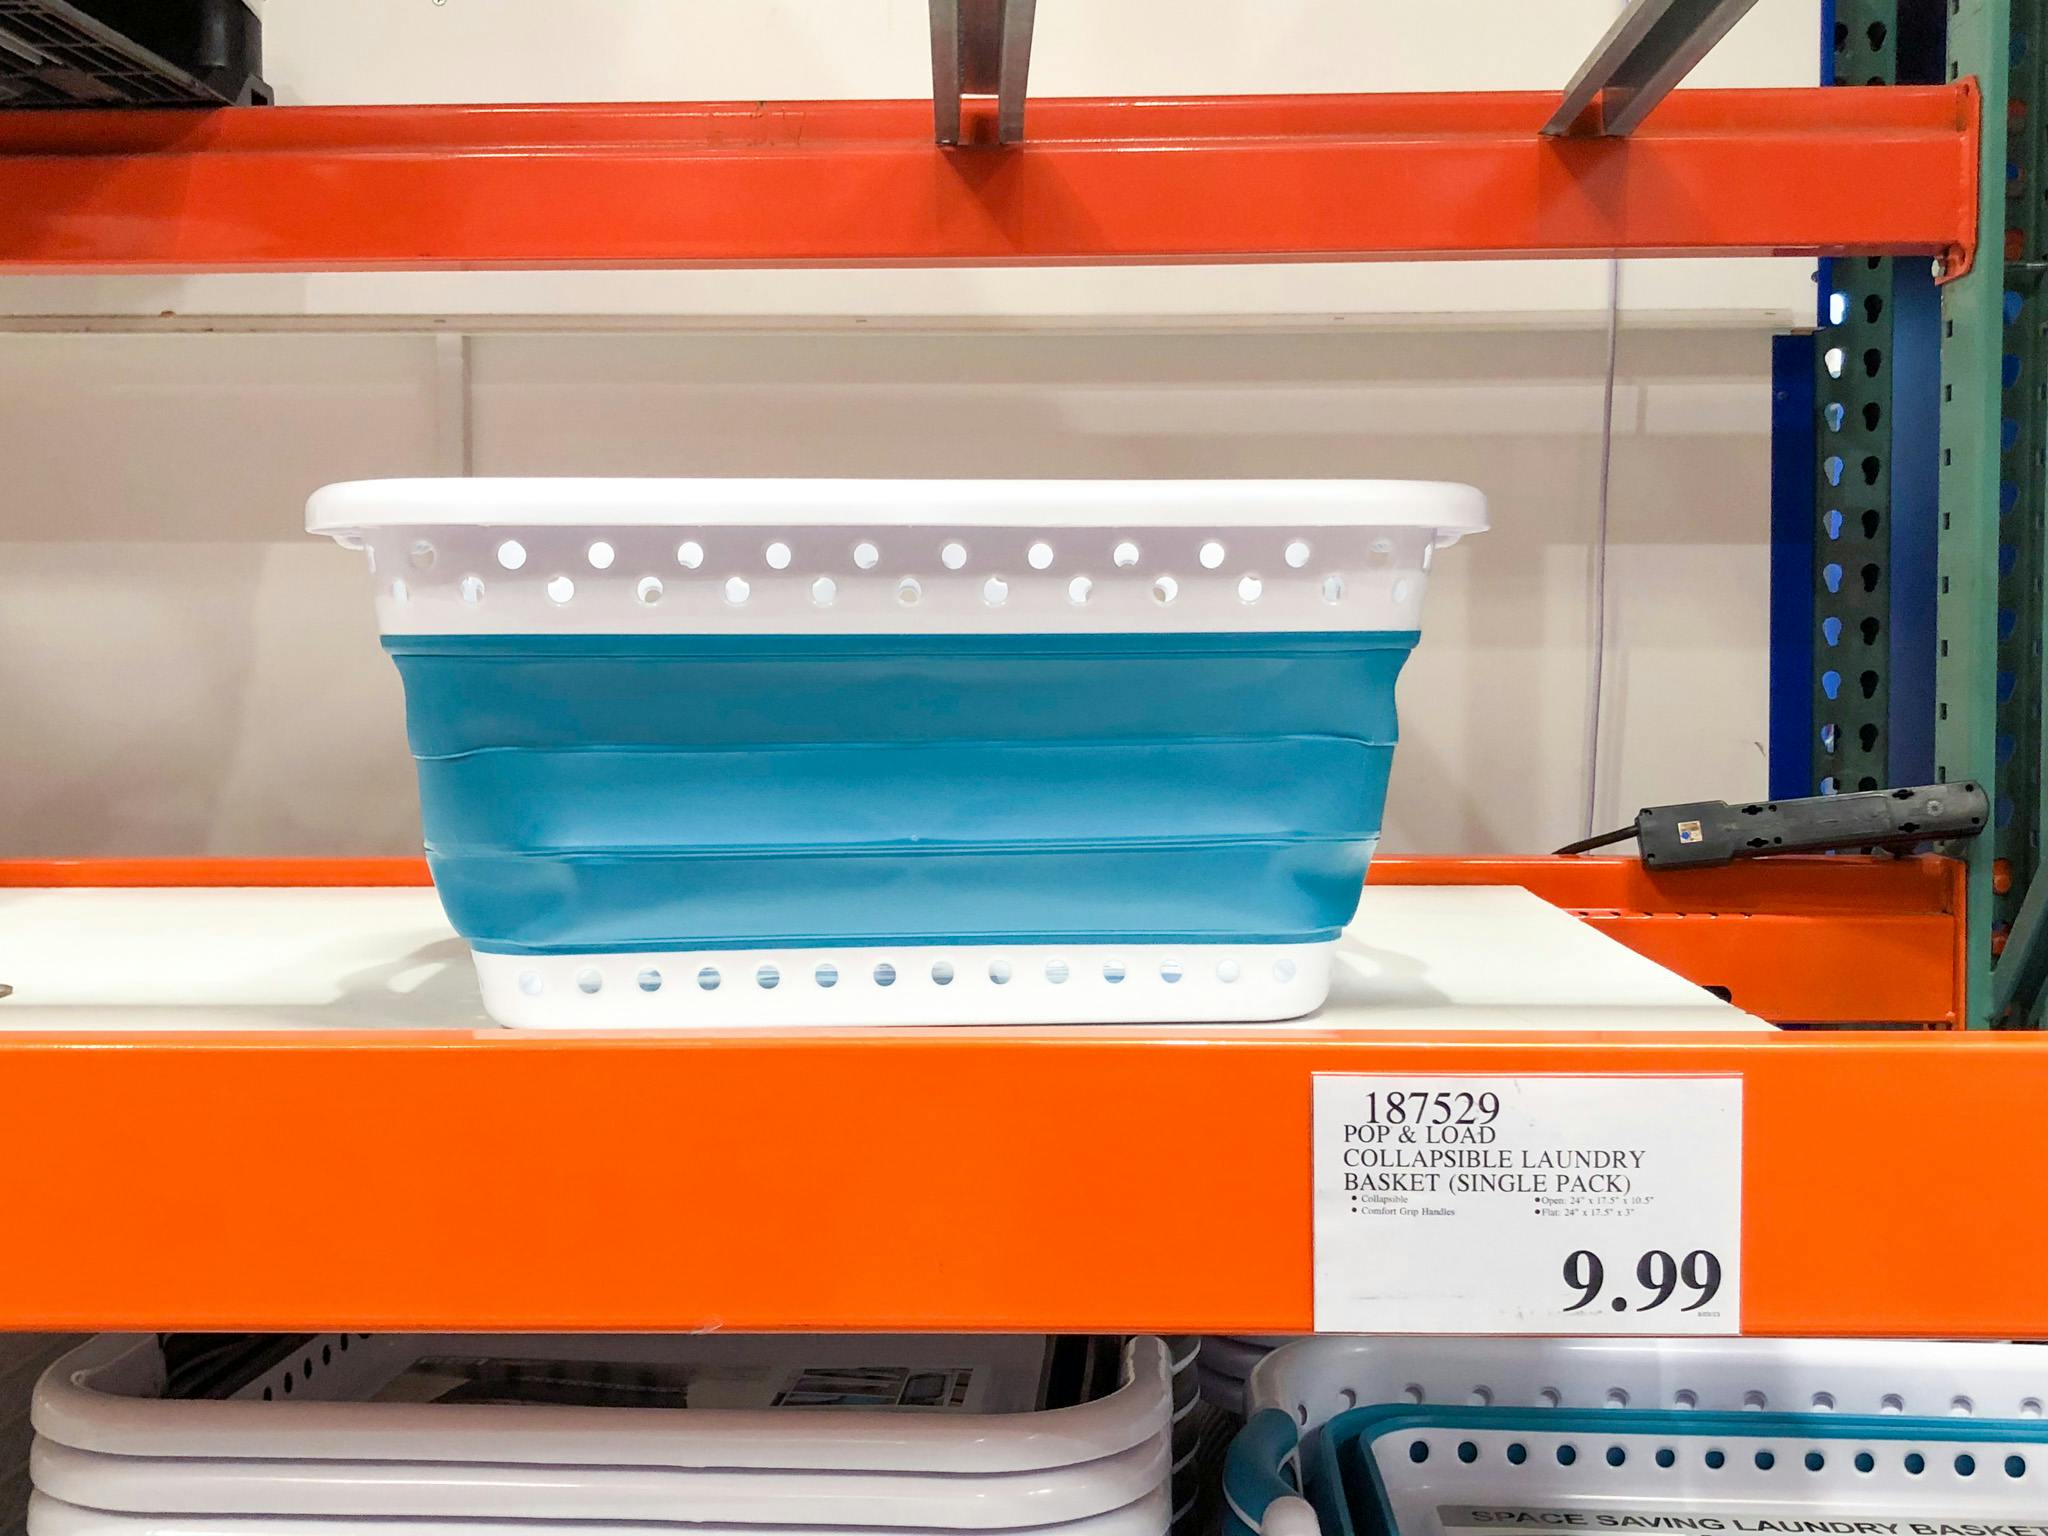 Collapsible laundry basket at Costco for only $9.99! These are so